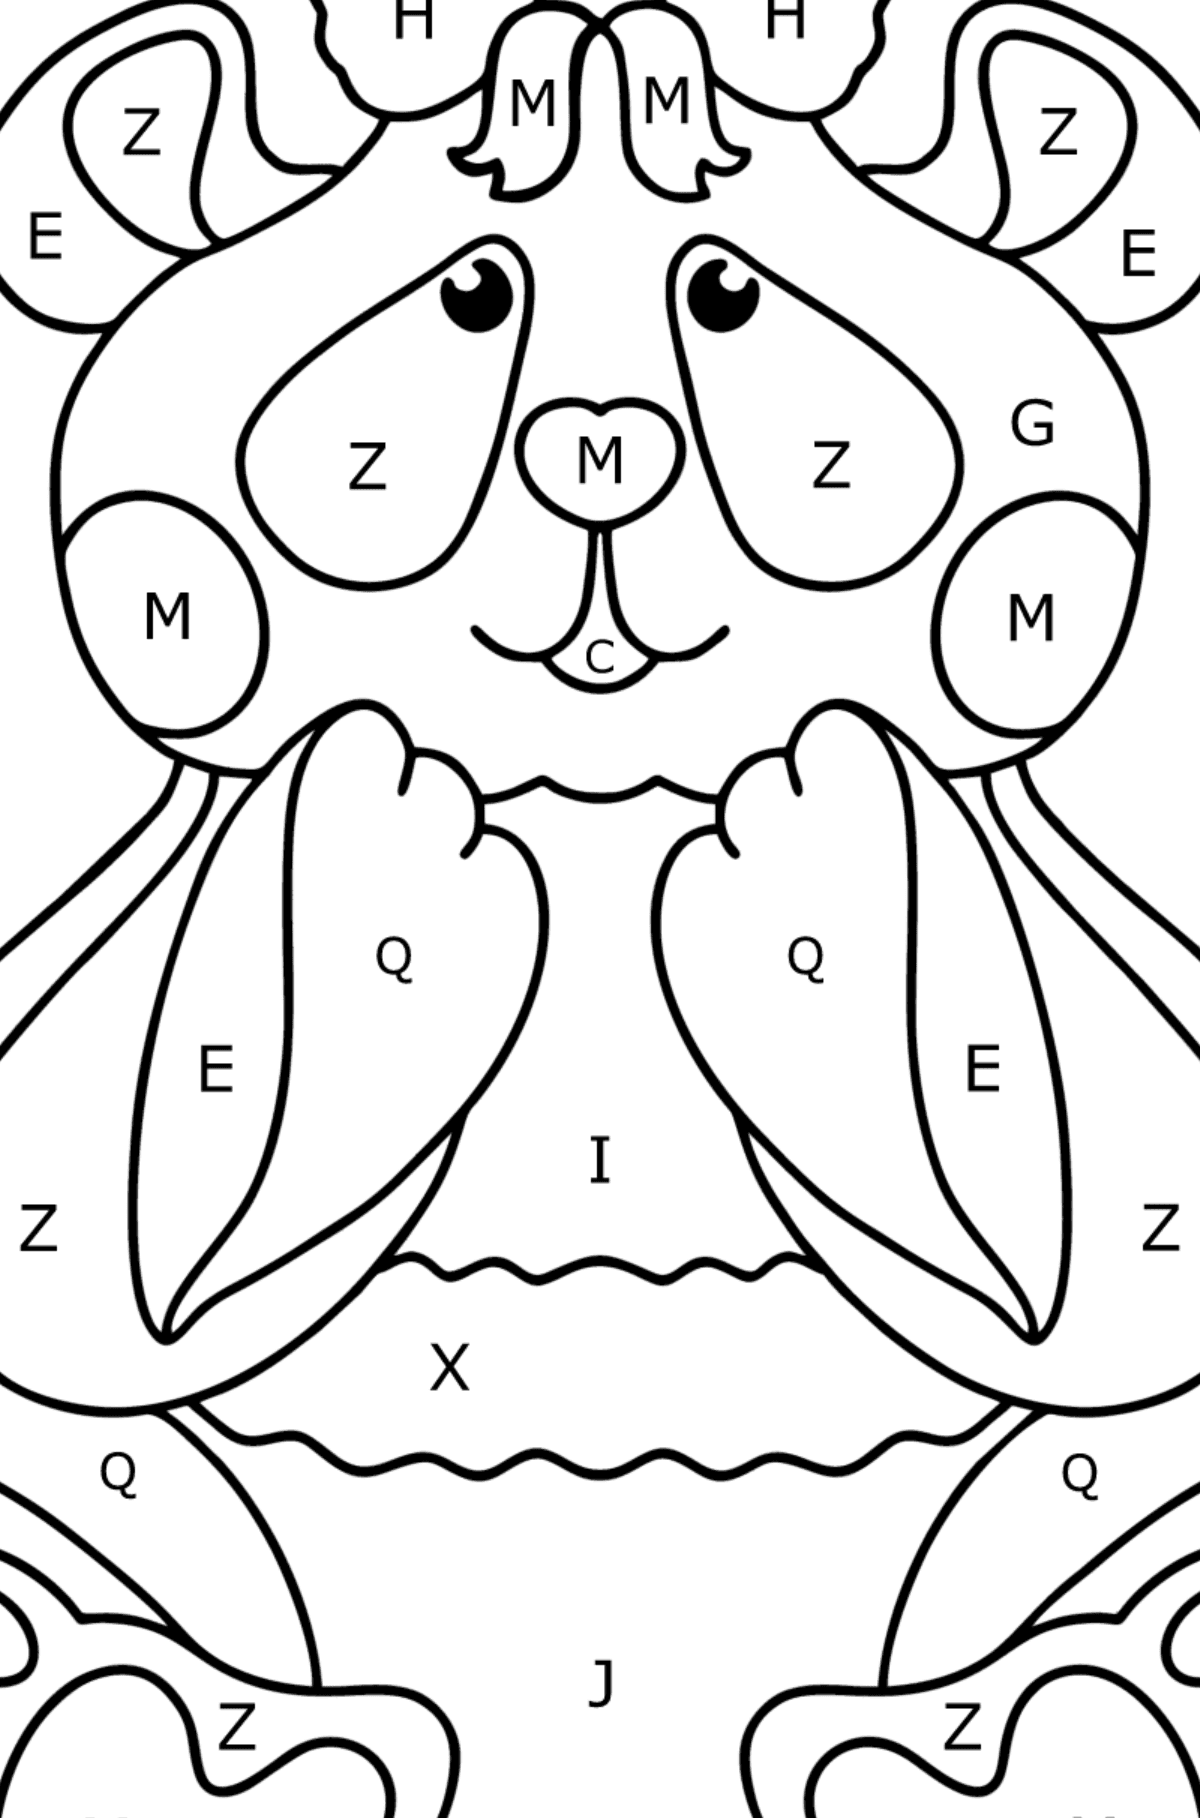 Panda baby coloring page - Coloring by Letters for Kids